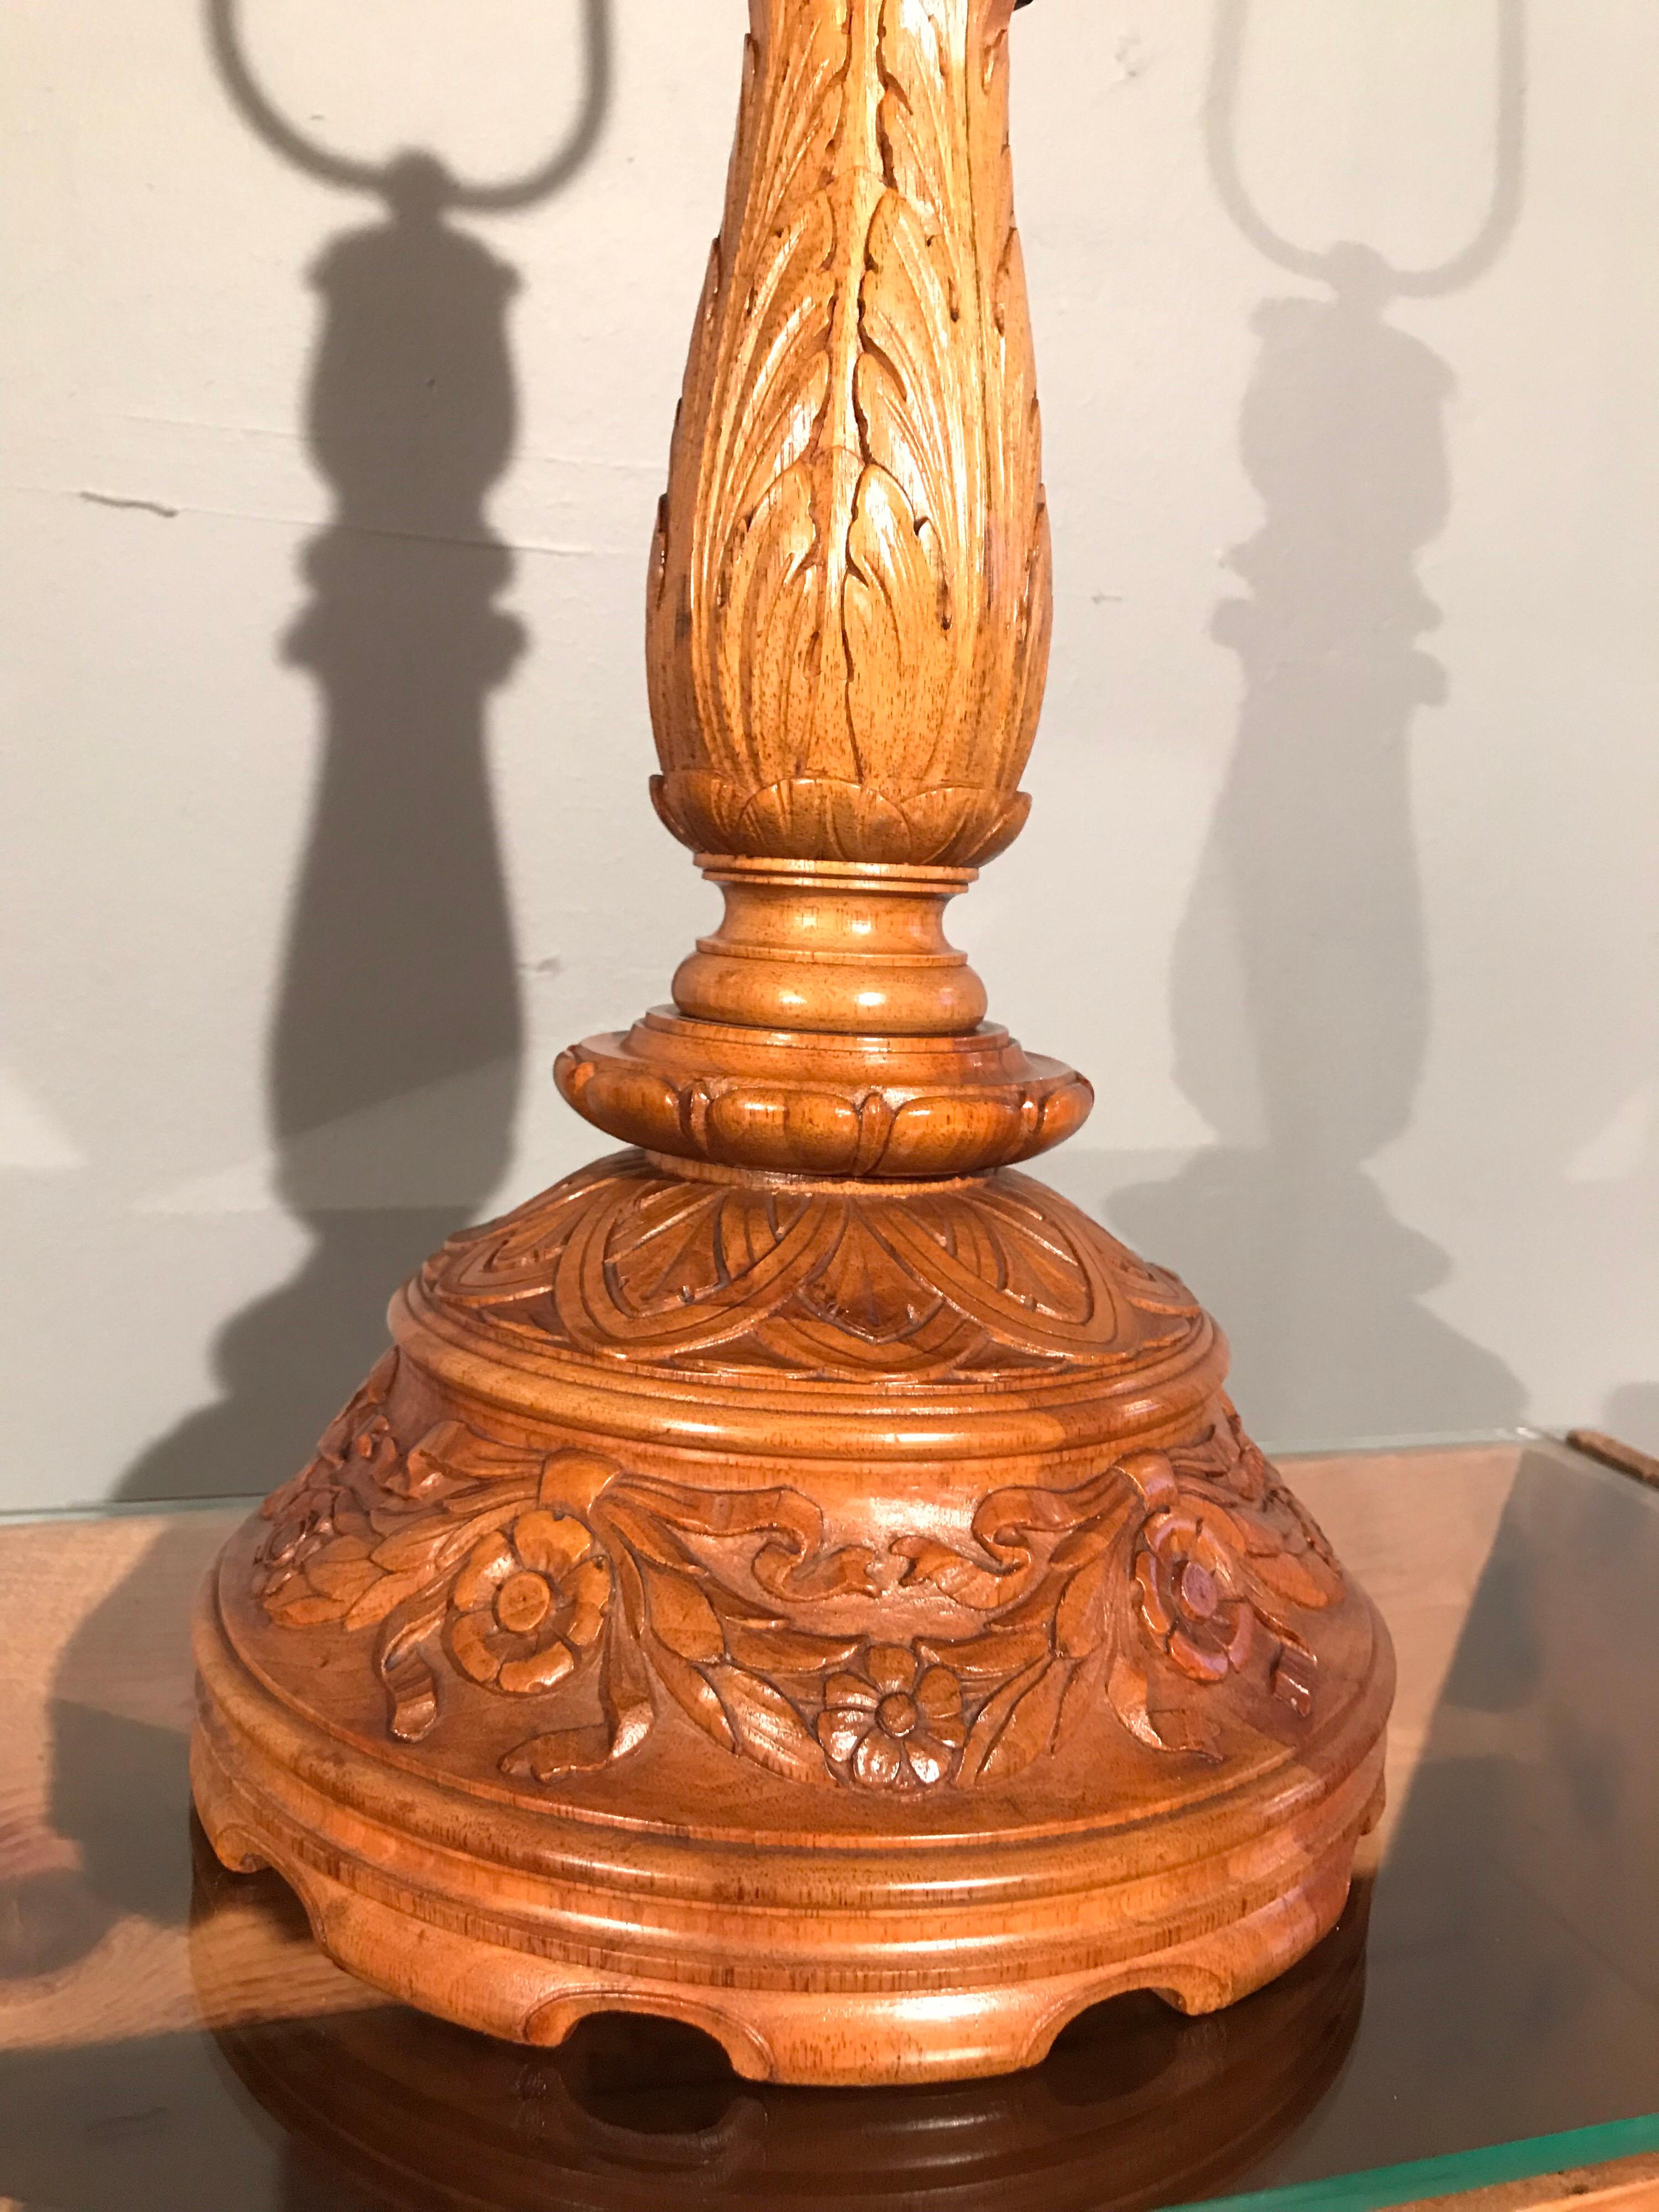 Hand carved table lamp with in fruit wood with great attention to detail and with good proportions.
Carved floral design with ribbons and in great condition with no chips or cracks.

Great English country house style. 